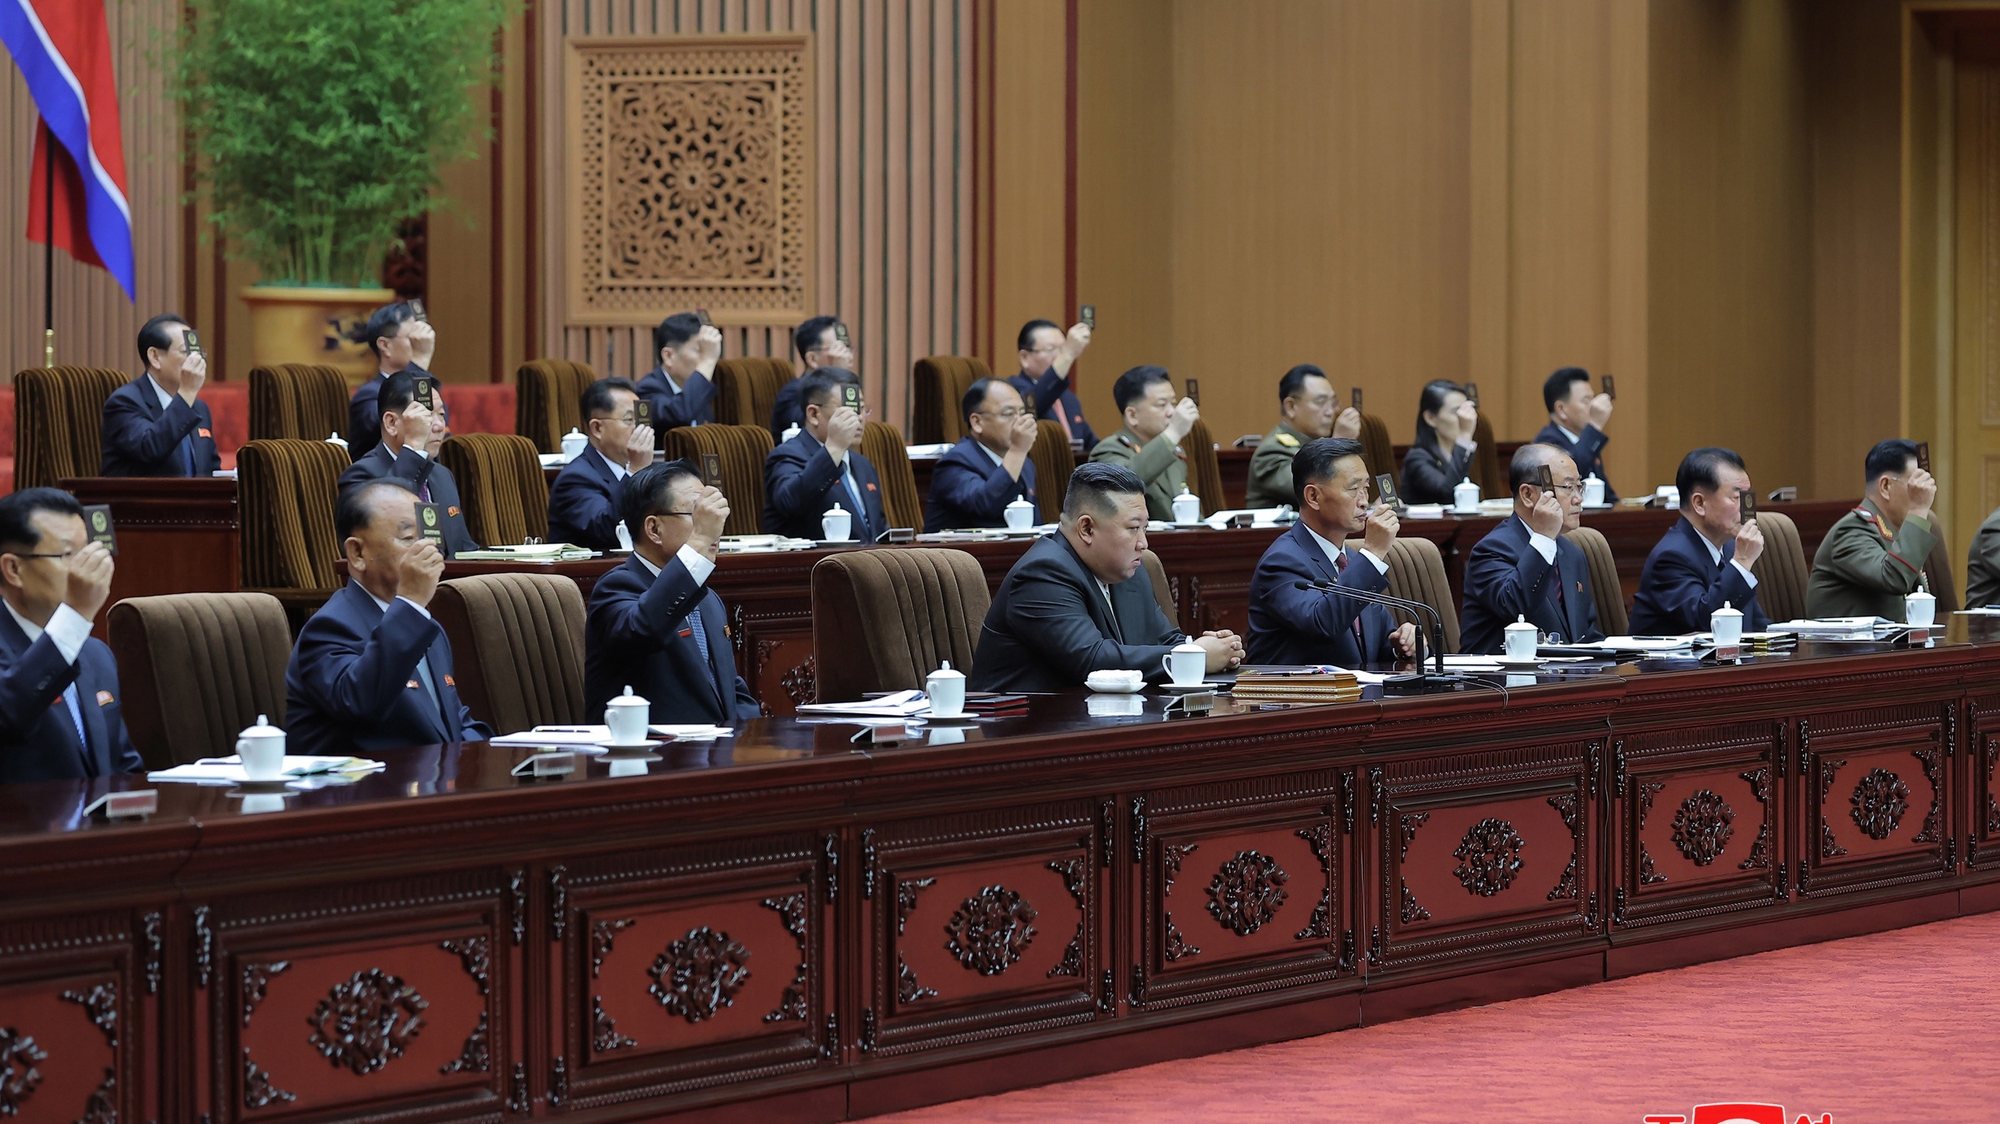 epa10887070 A photo released by the official North Korean Central News Agency (KCNA) on 28 September 2023 shows North Korean leader Kim Jong Un (C, front row) attending the 9th Session of the 14th Supreme People&#039;s Assembly (SPA) at the Mansudae Assembly Hall in Pyongyang, North Korea, during the two-day event on 26-27 September 2023. North Korea&#039;s legislature has enshrined its status as a nuclear power in its constitution with the unanimous adoption of a &#039;crucial agenda item for formulating the DPRK&#039;s policy on nuclear force as the basic law of the state&#039;, according to KCNA.  EPA/KCNA   EDITORIAL USE ONLY